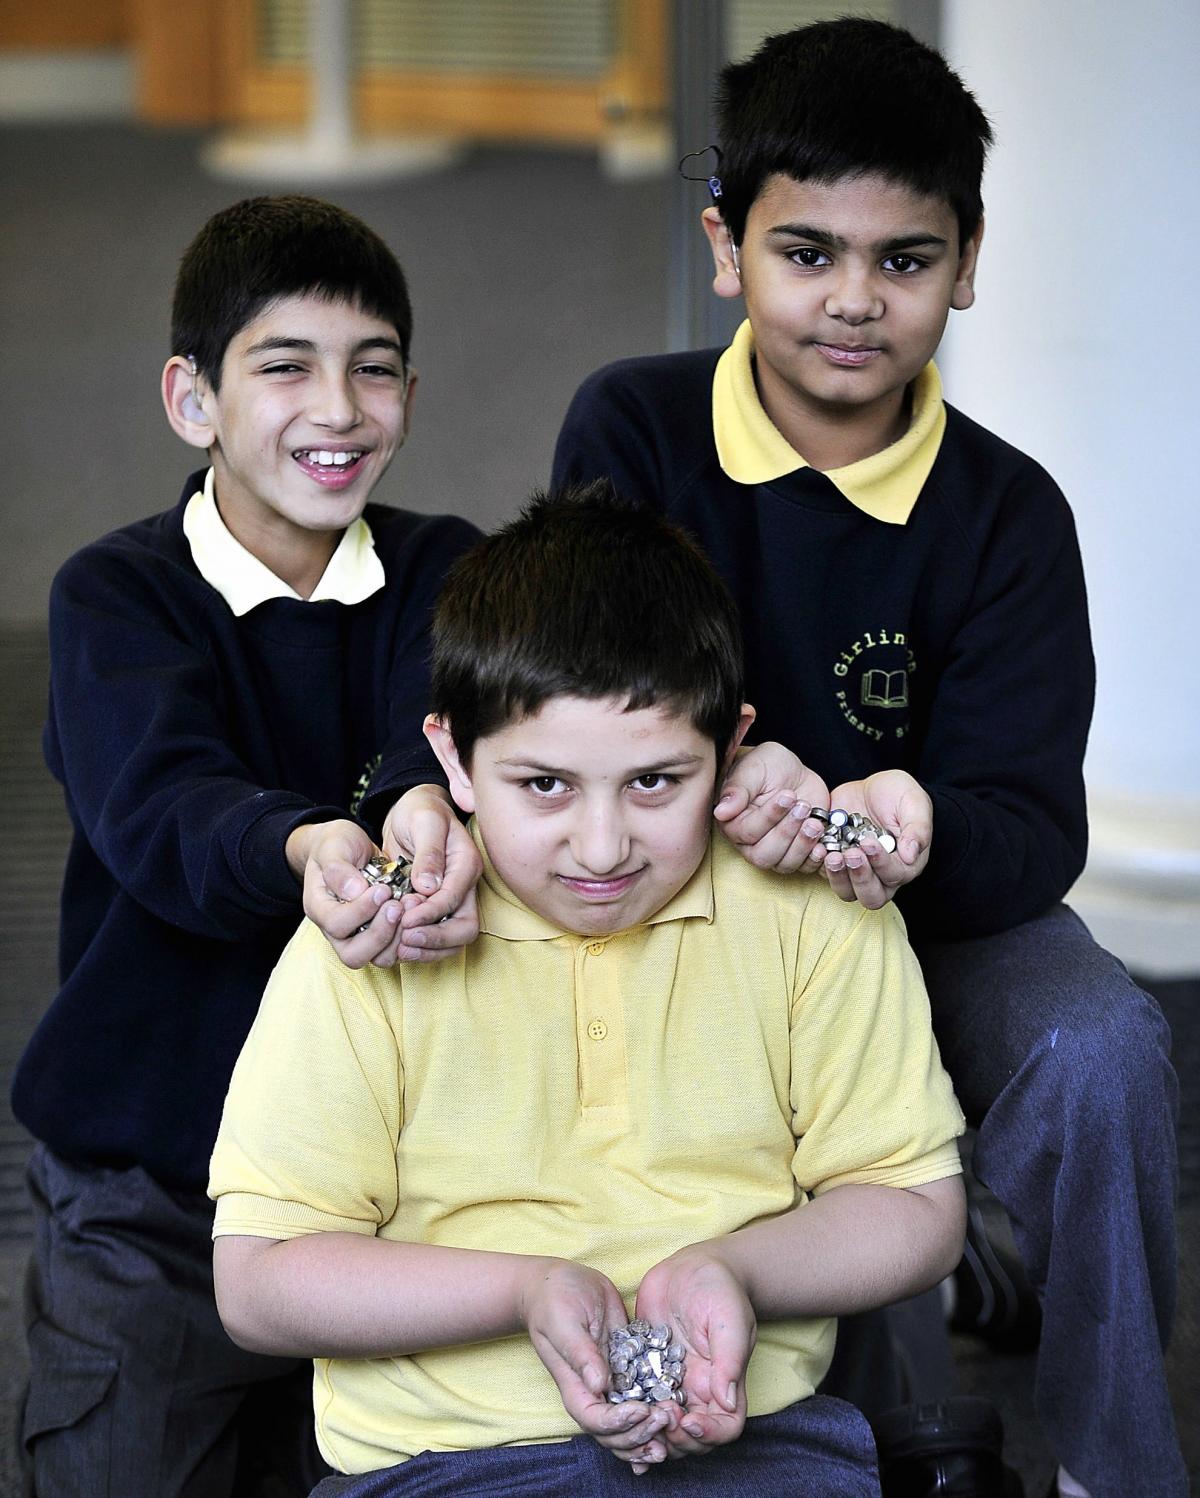 Mohammed Suffiyan, Sohail Ahmed and Adib Syed with some of the batteries they helped to collect for recycling